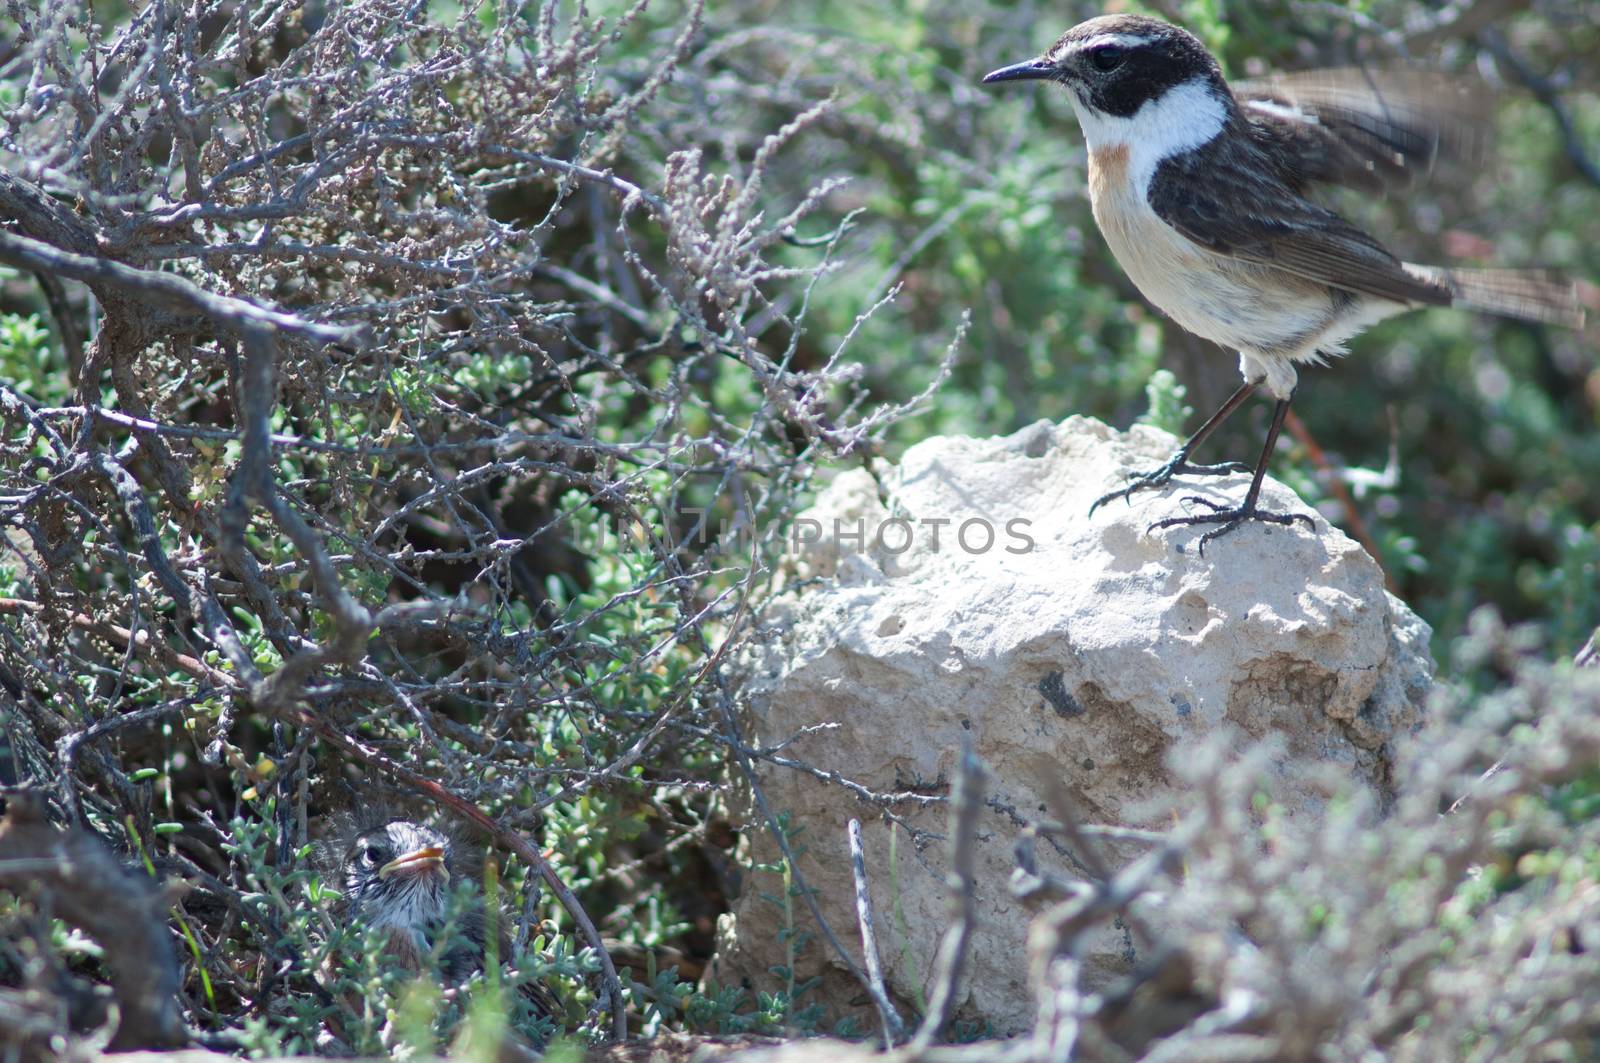 Canary Islands stonechats (Saxicola dacotiae). Male and its chick. Esquinzo ravine. La Oliva. Fuerteventura. Canary Islands. Spain.